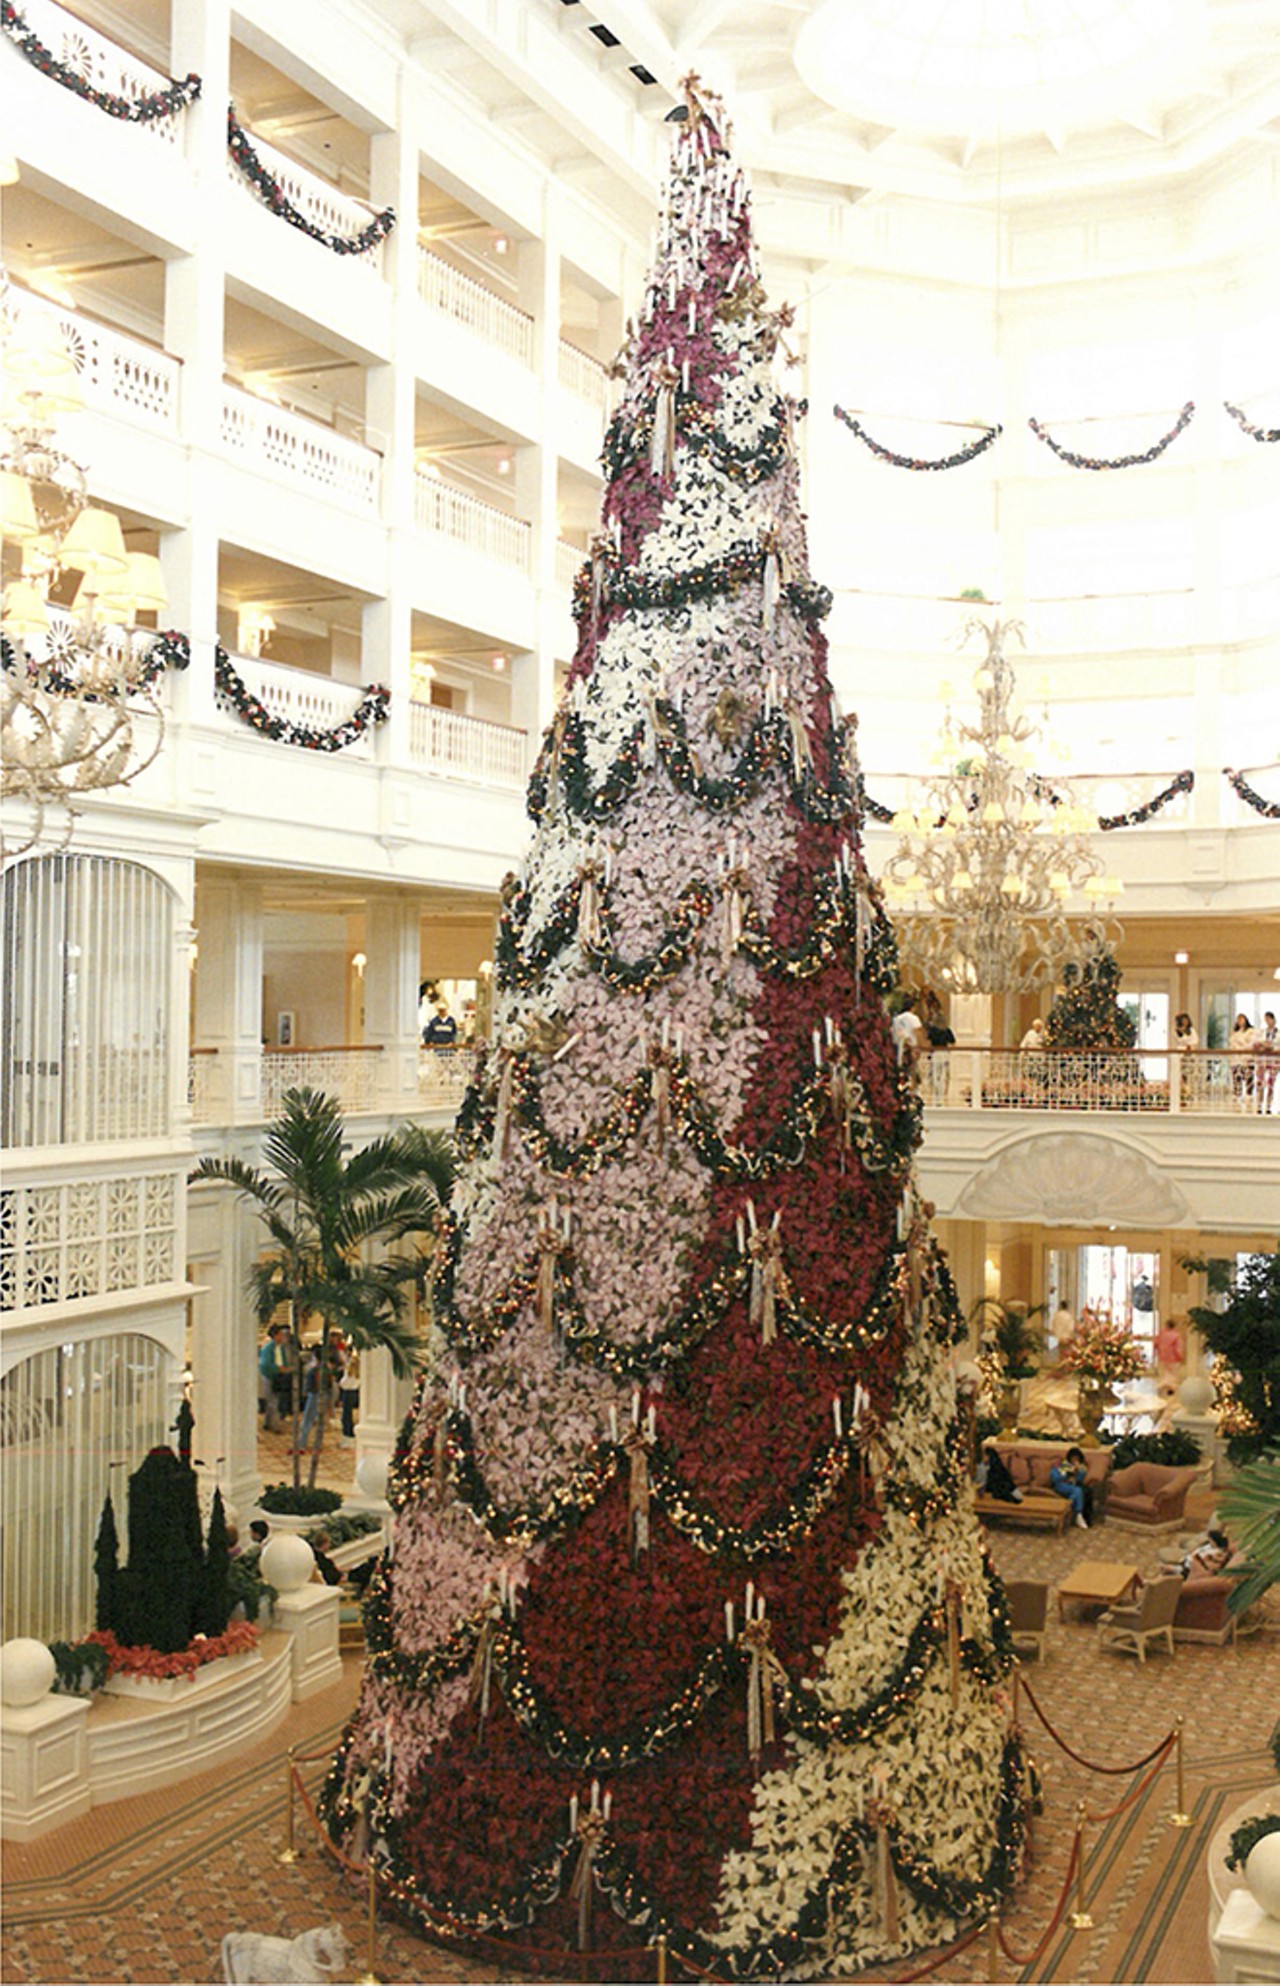 28 photos of Christmas at Disney World in the early '90s